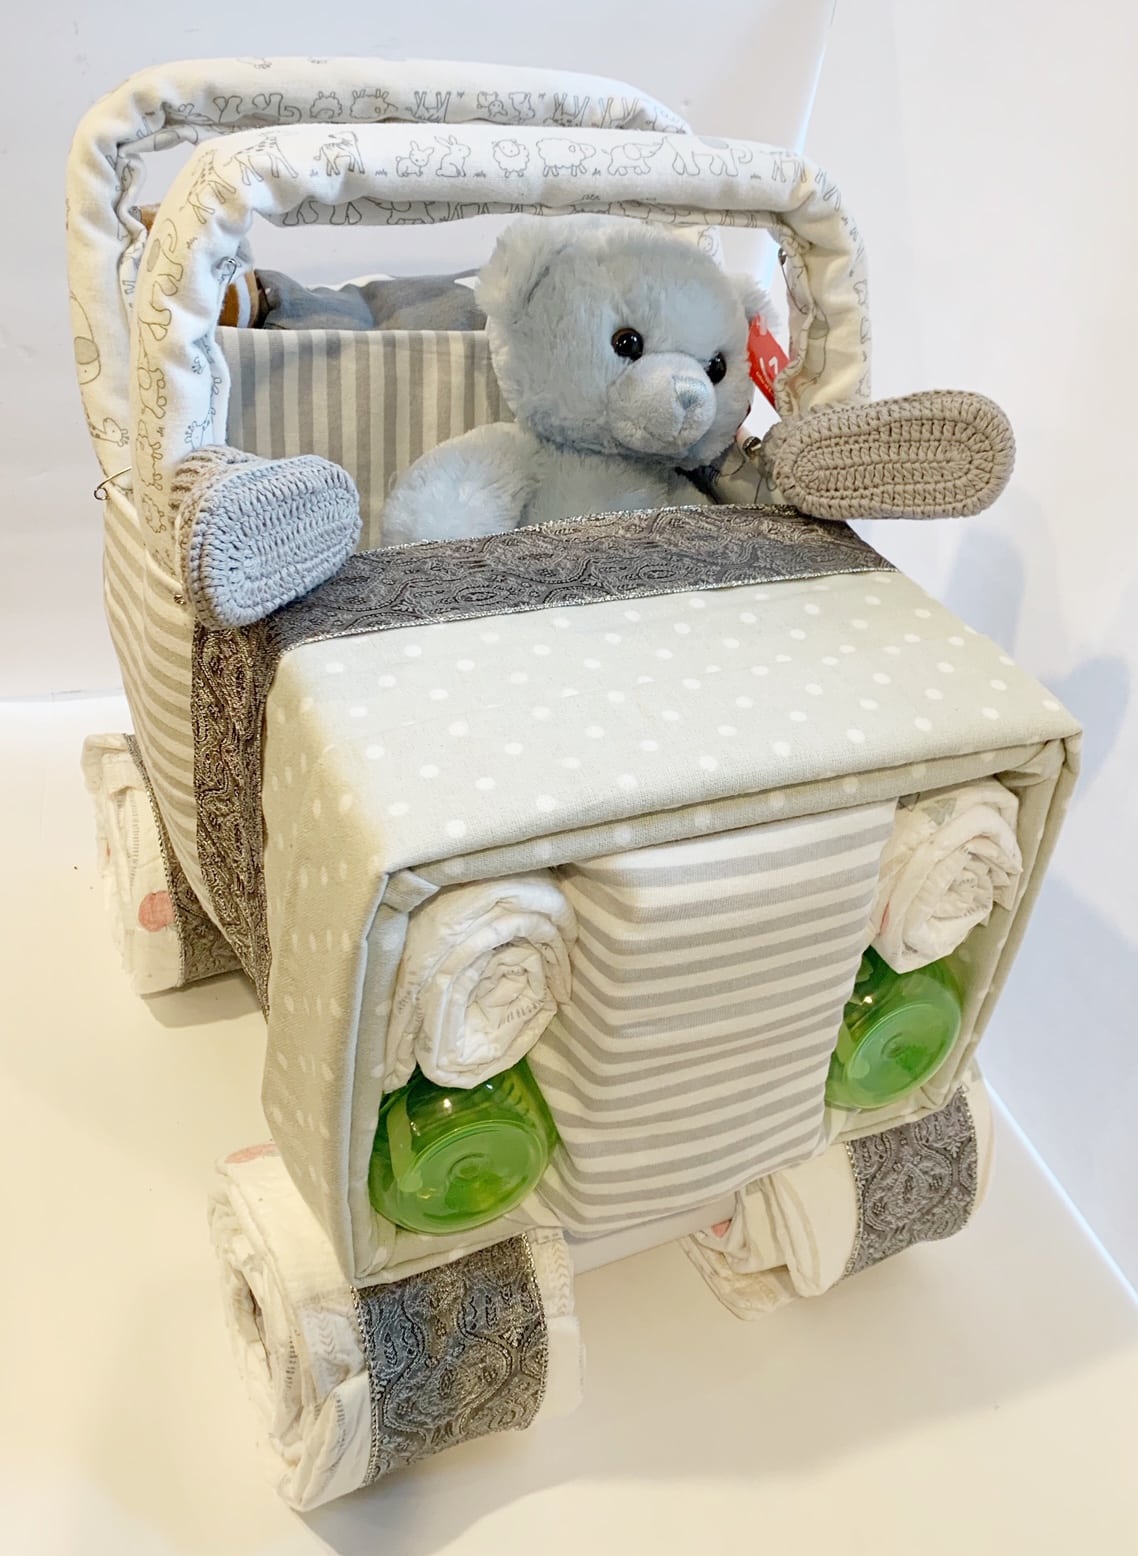 How to make a diaper jeep wheel